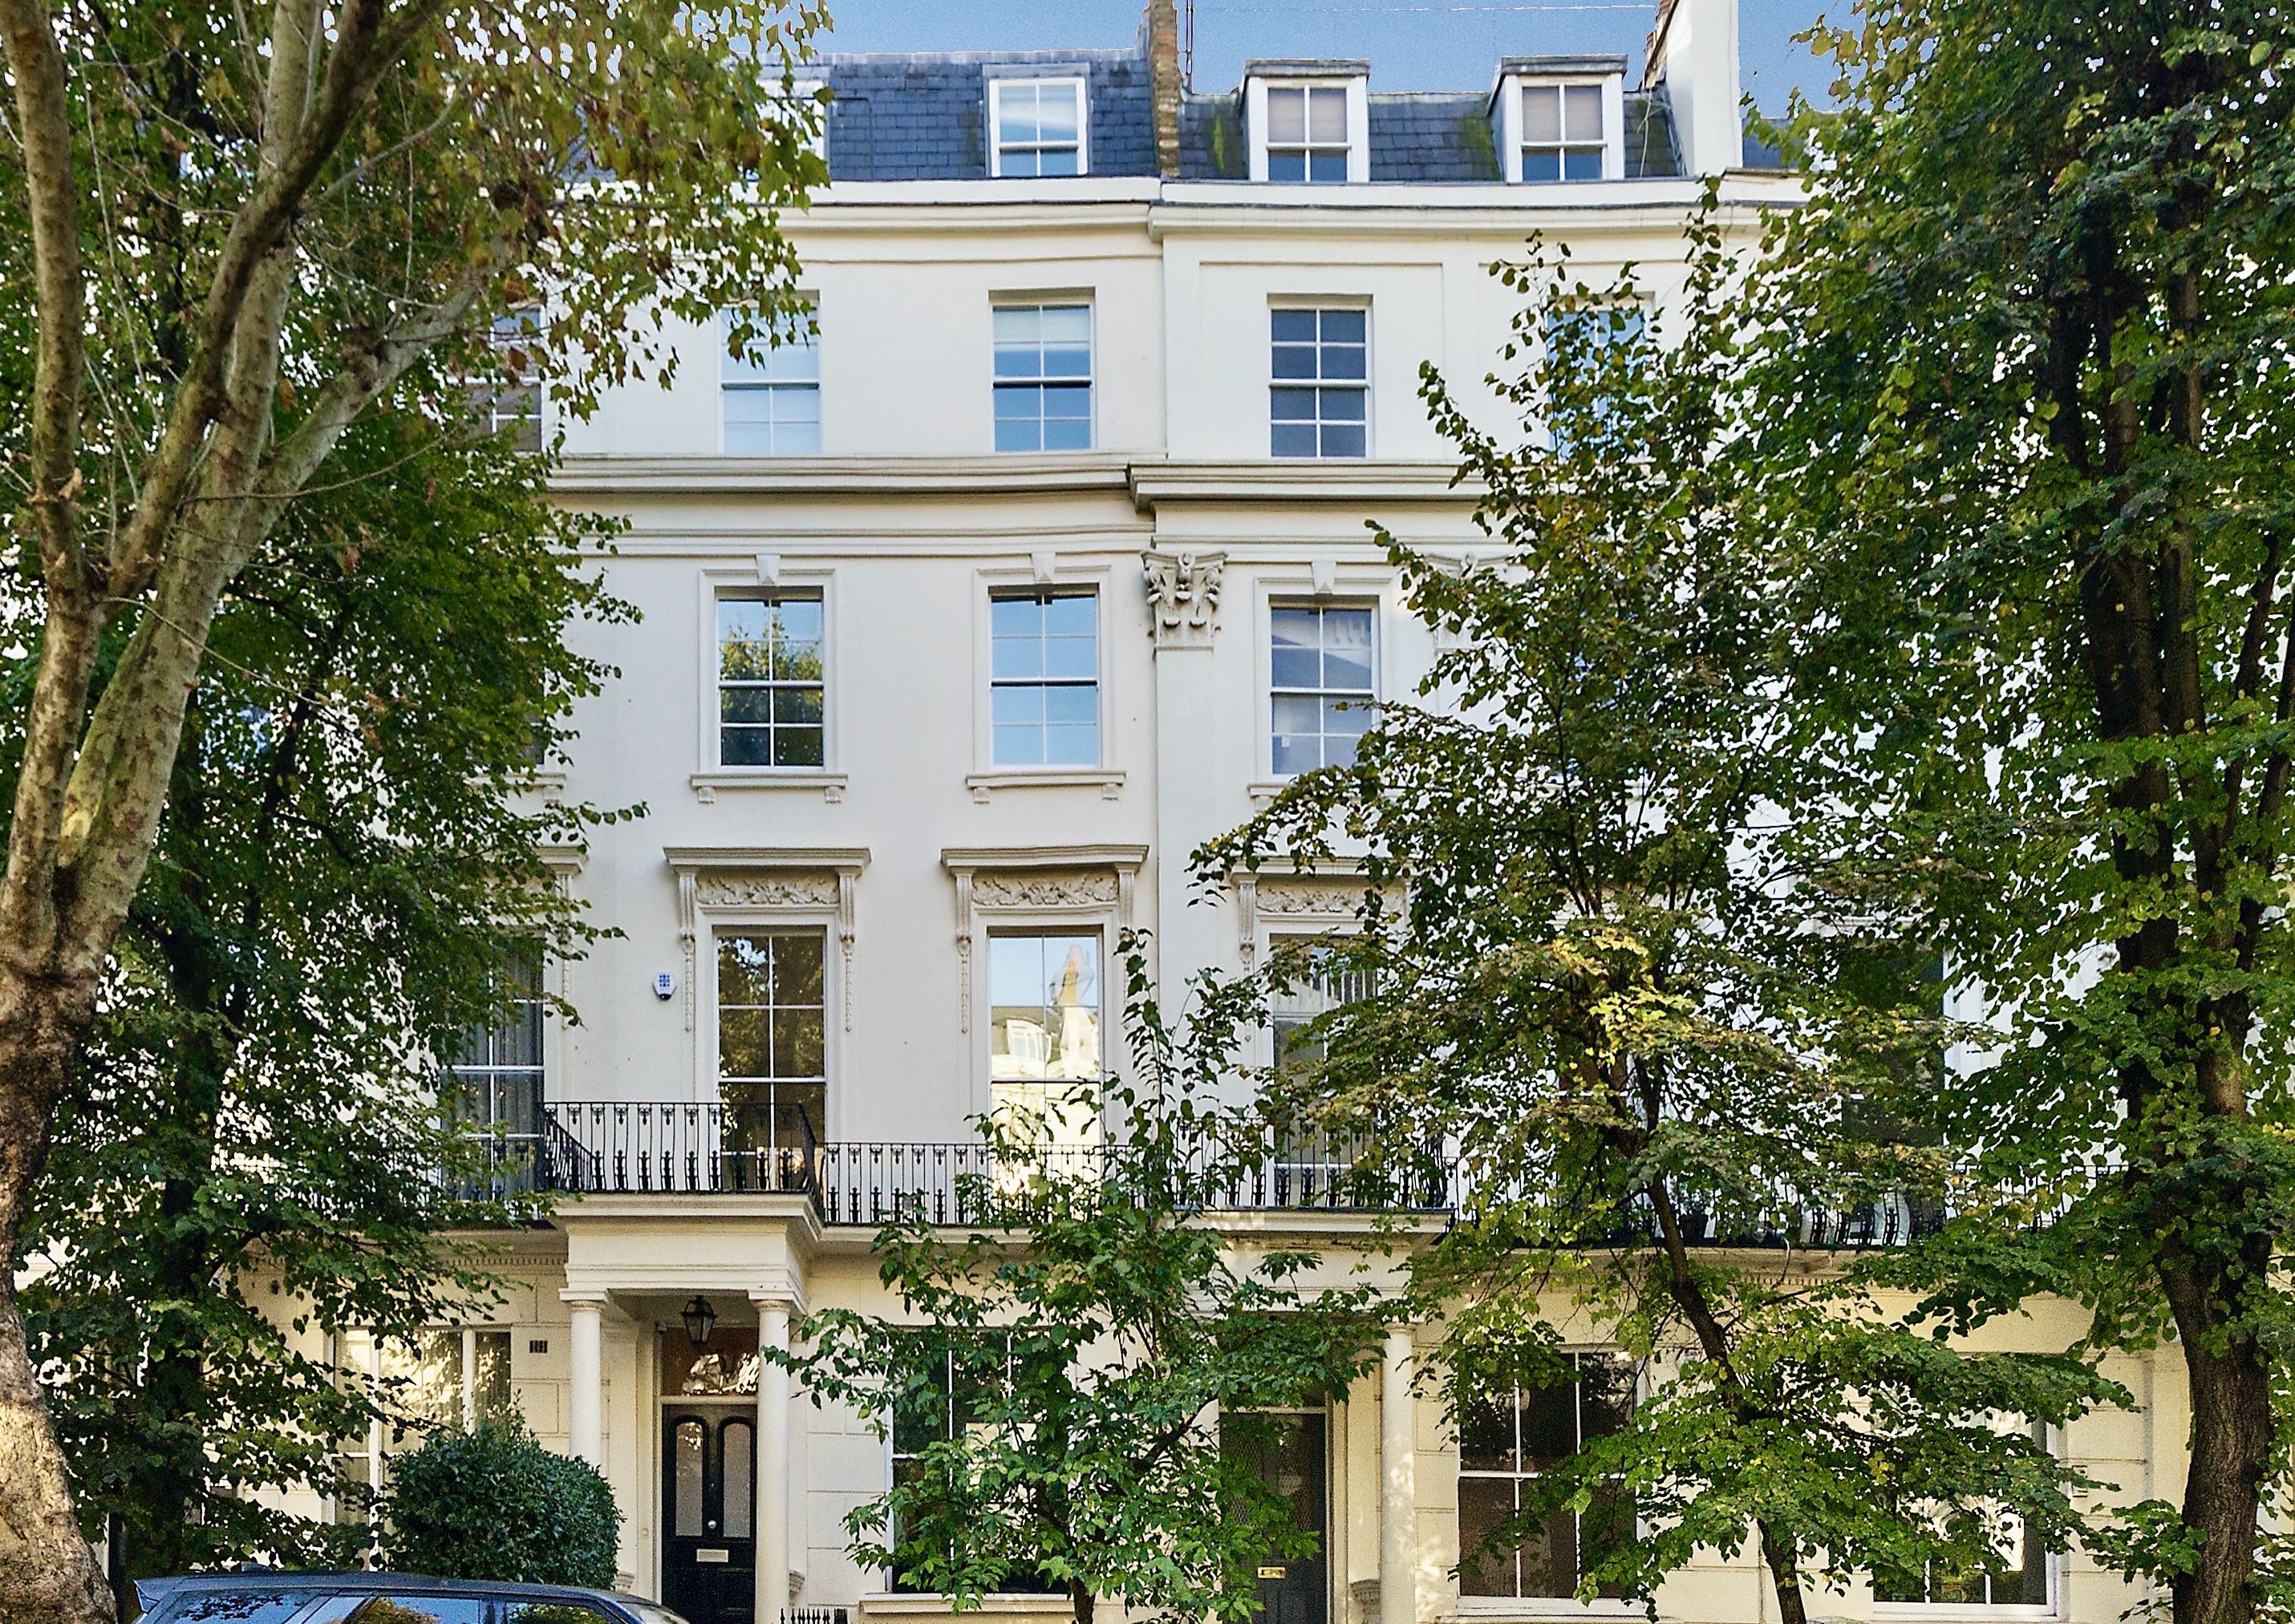 sold-clifton-gardens-london-298-epcview2